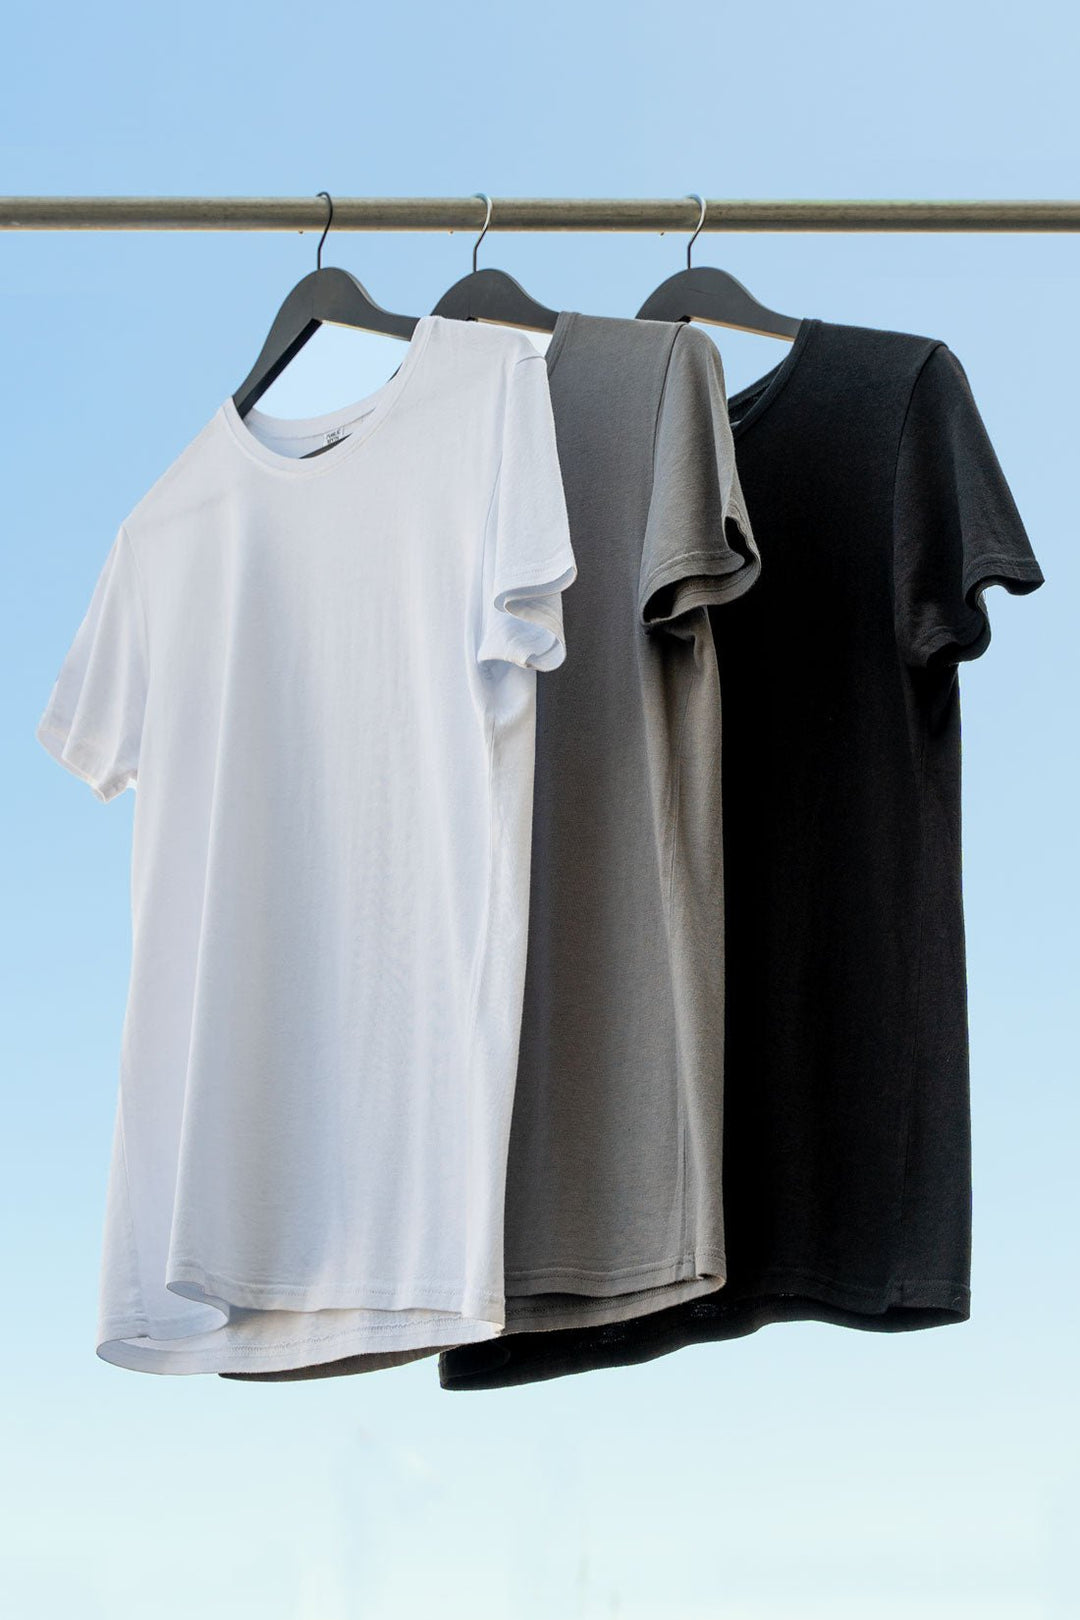 men's bamboo T-shirts in white, gray and black